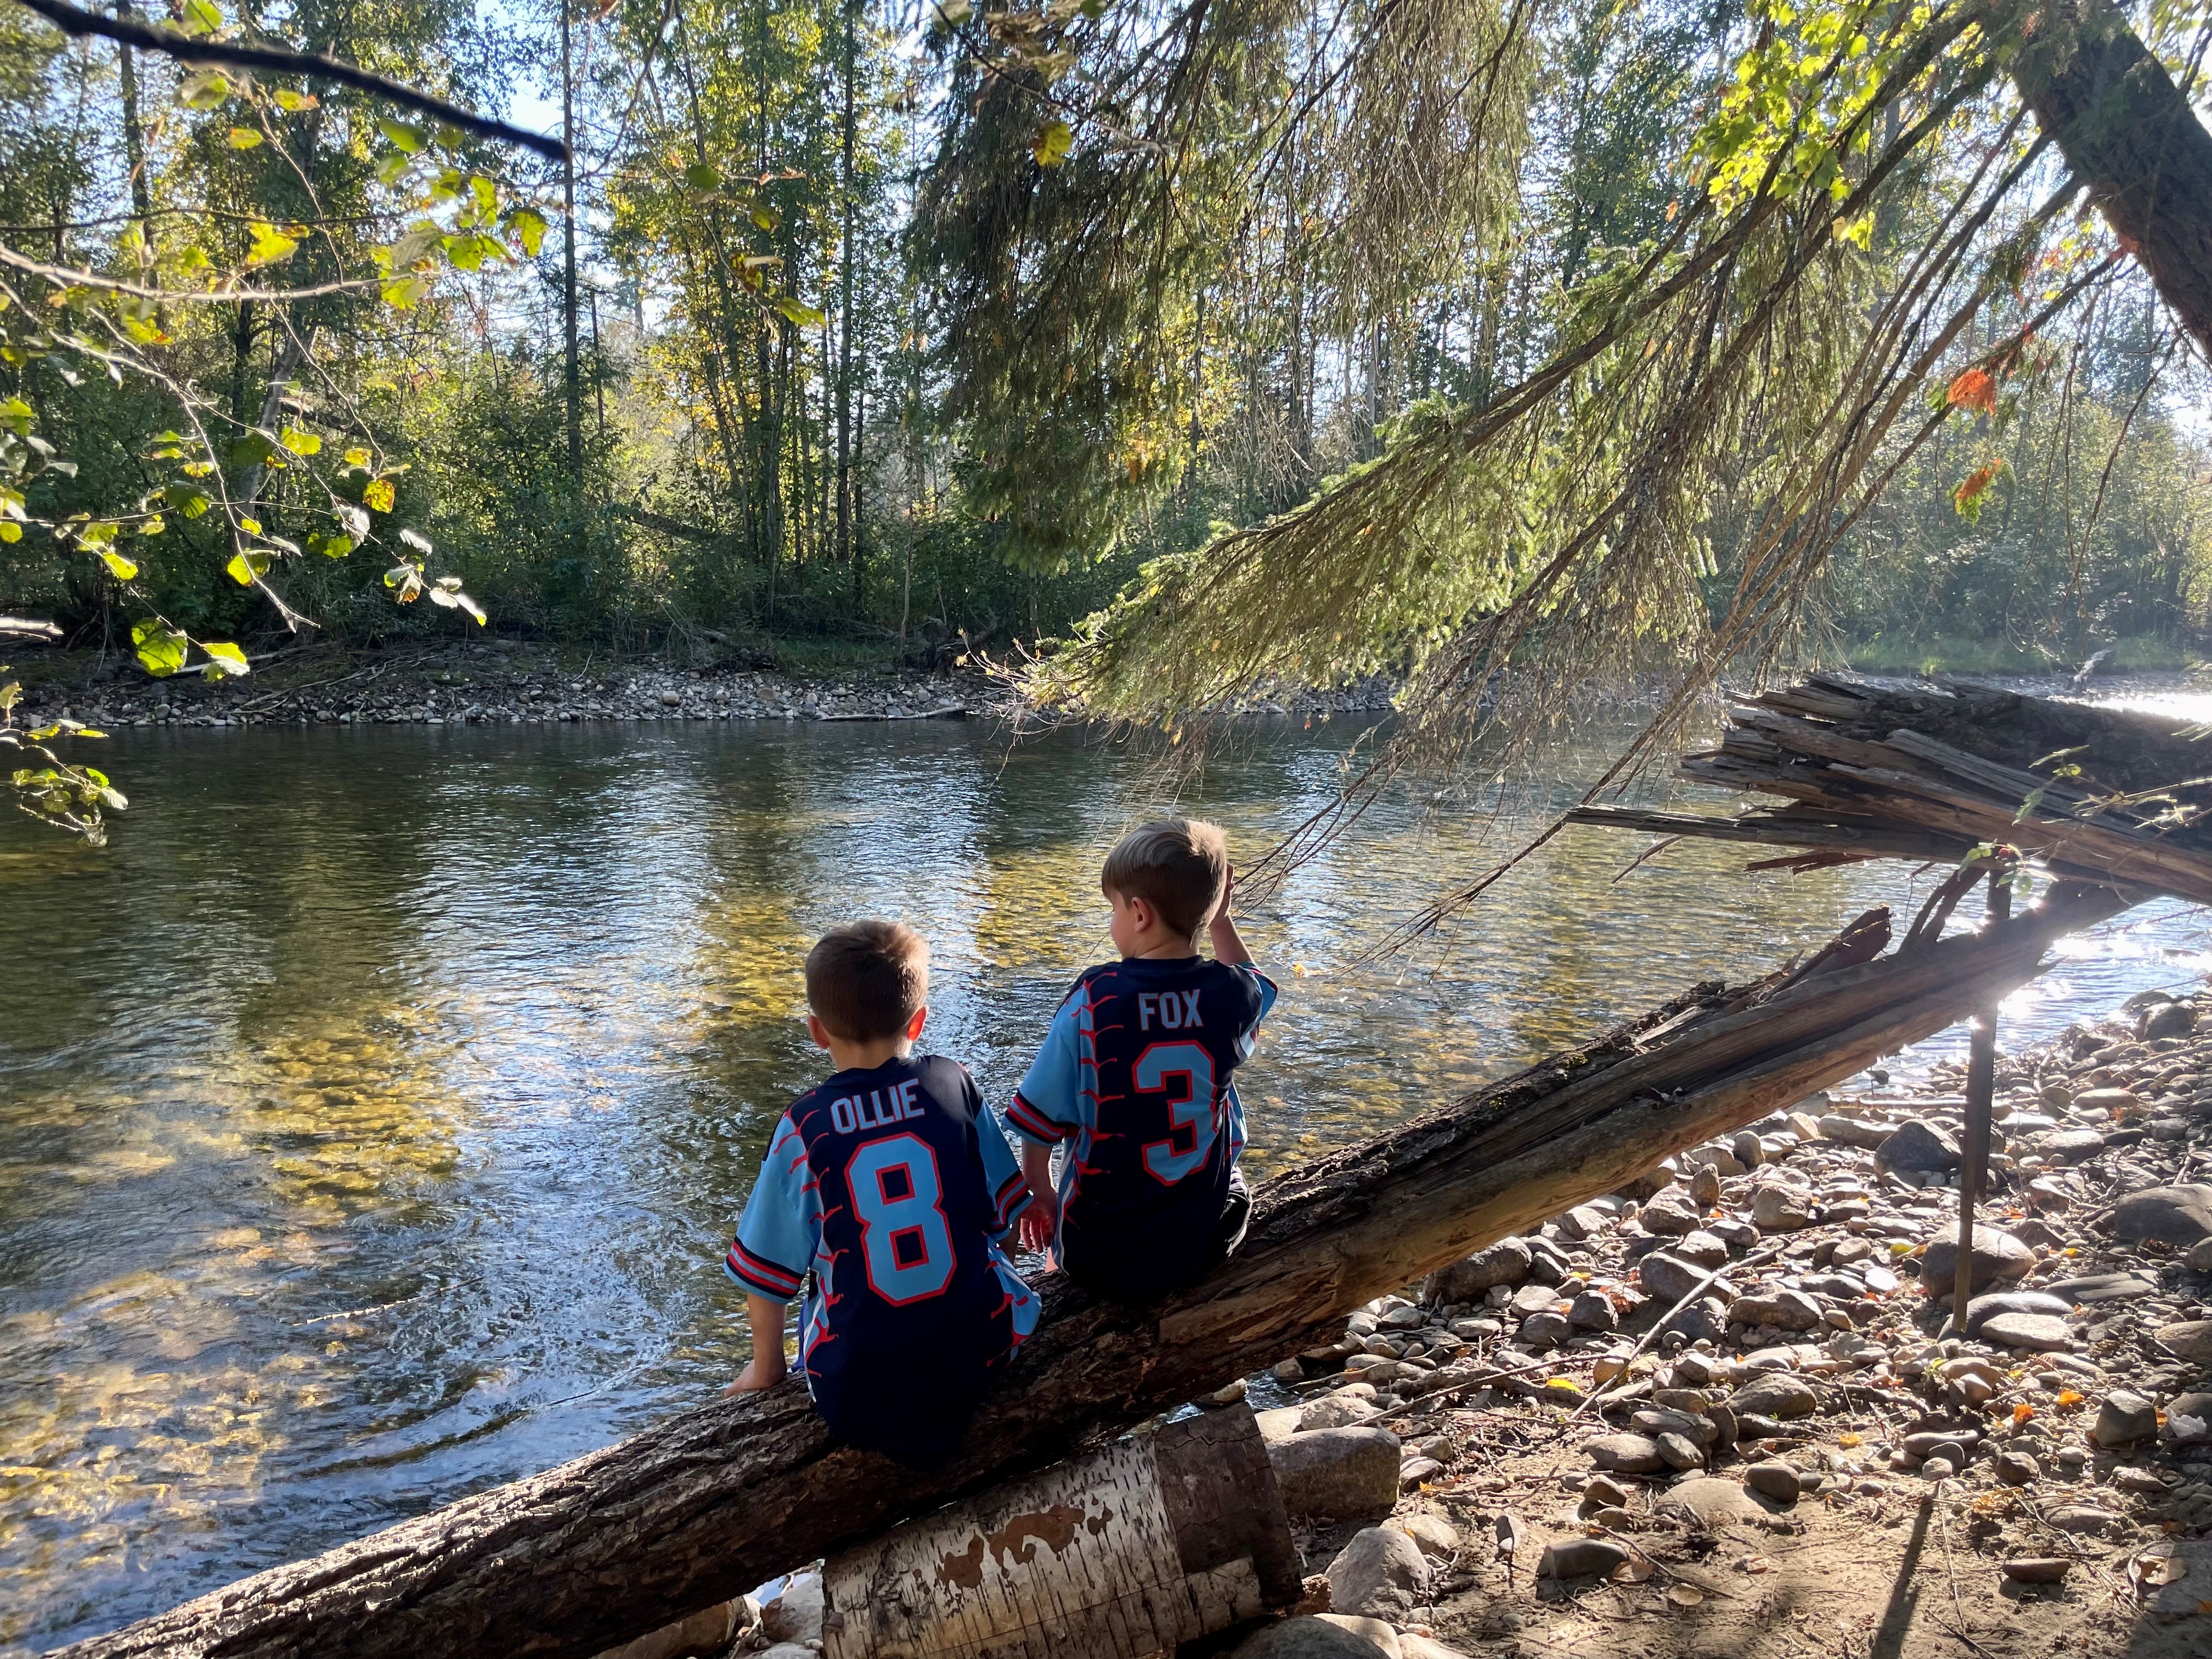 Two boys sitting on a log by a river surrounded by trees.